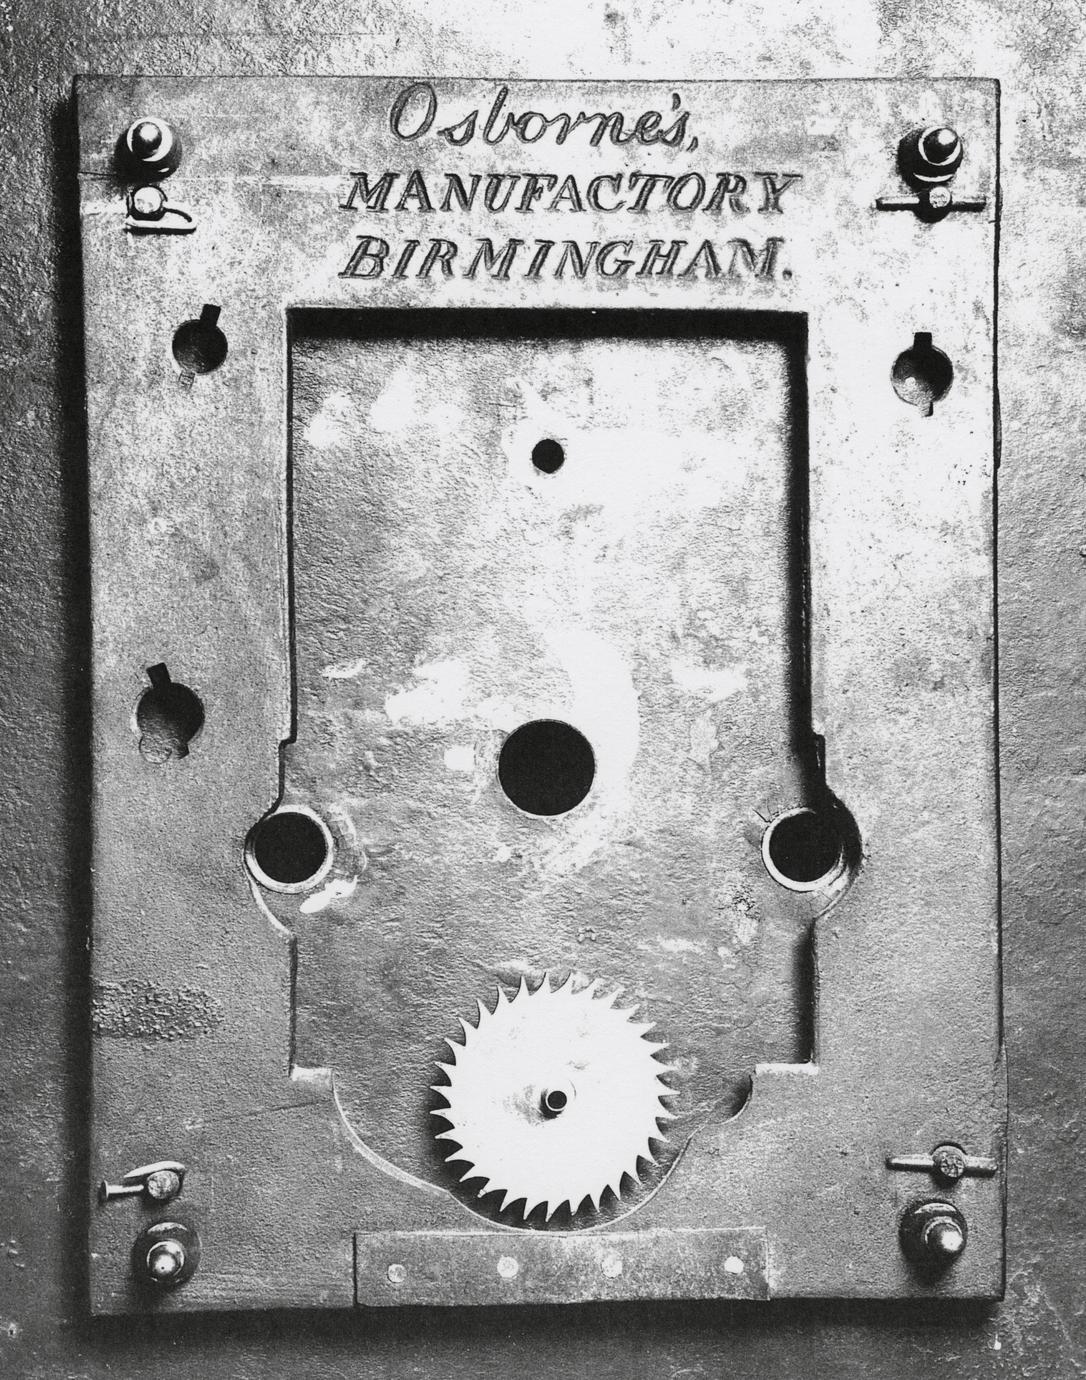 Black and white photograph of cast iron dial plate stamped "Osborne's MANUFACTORY BIRMINGHAM."